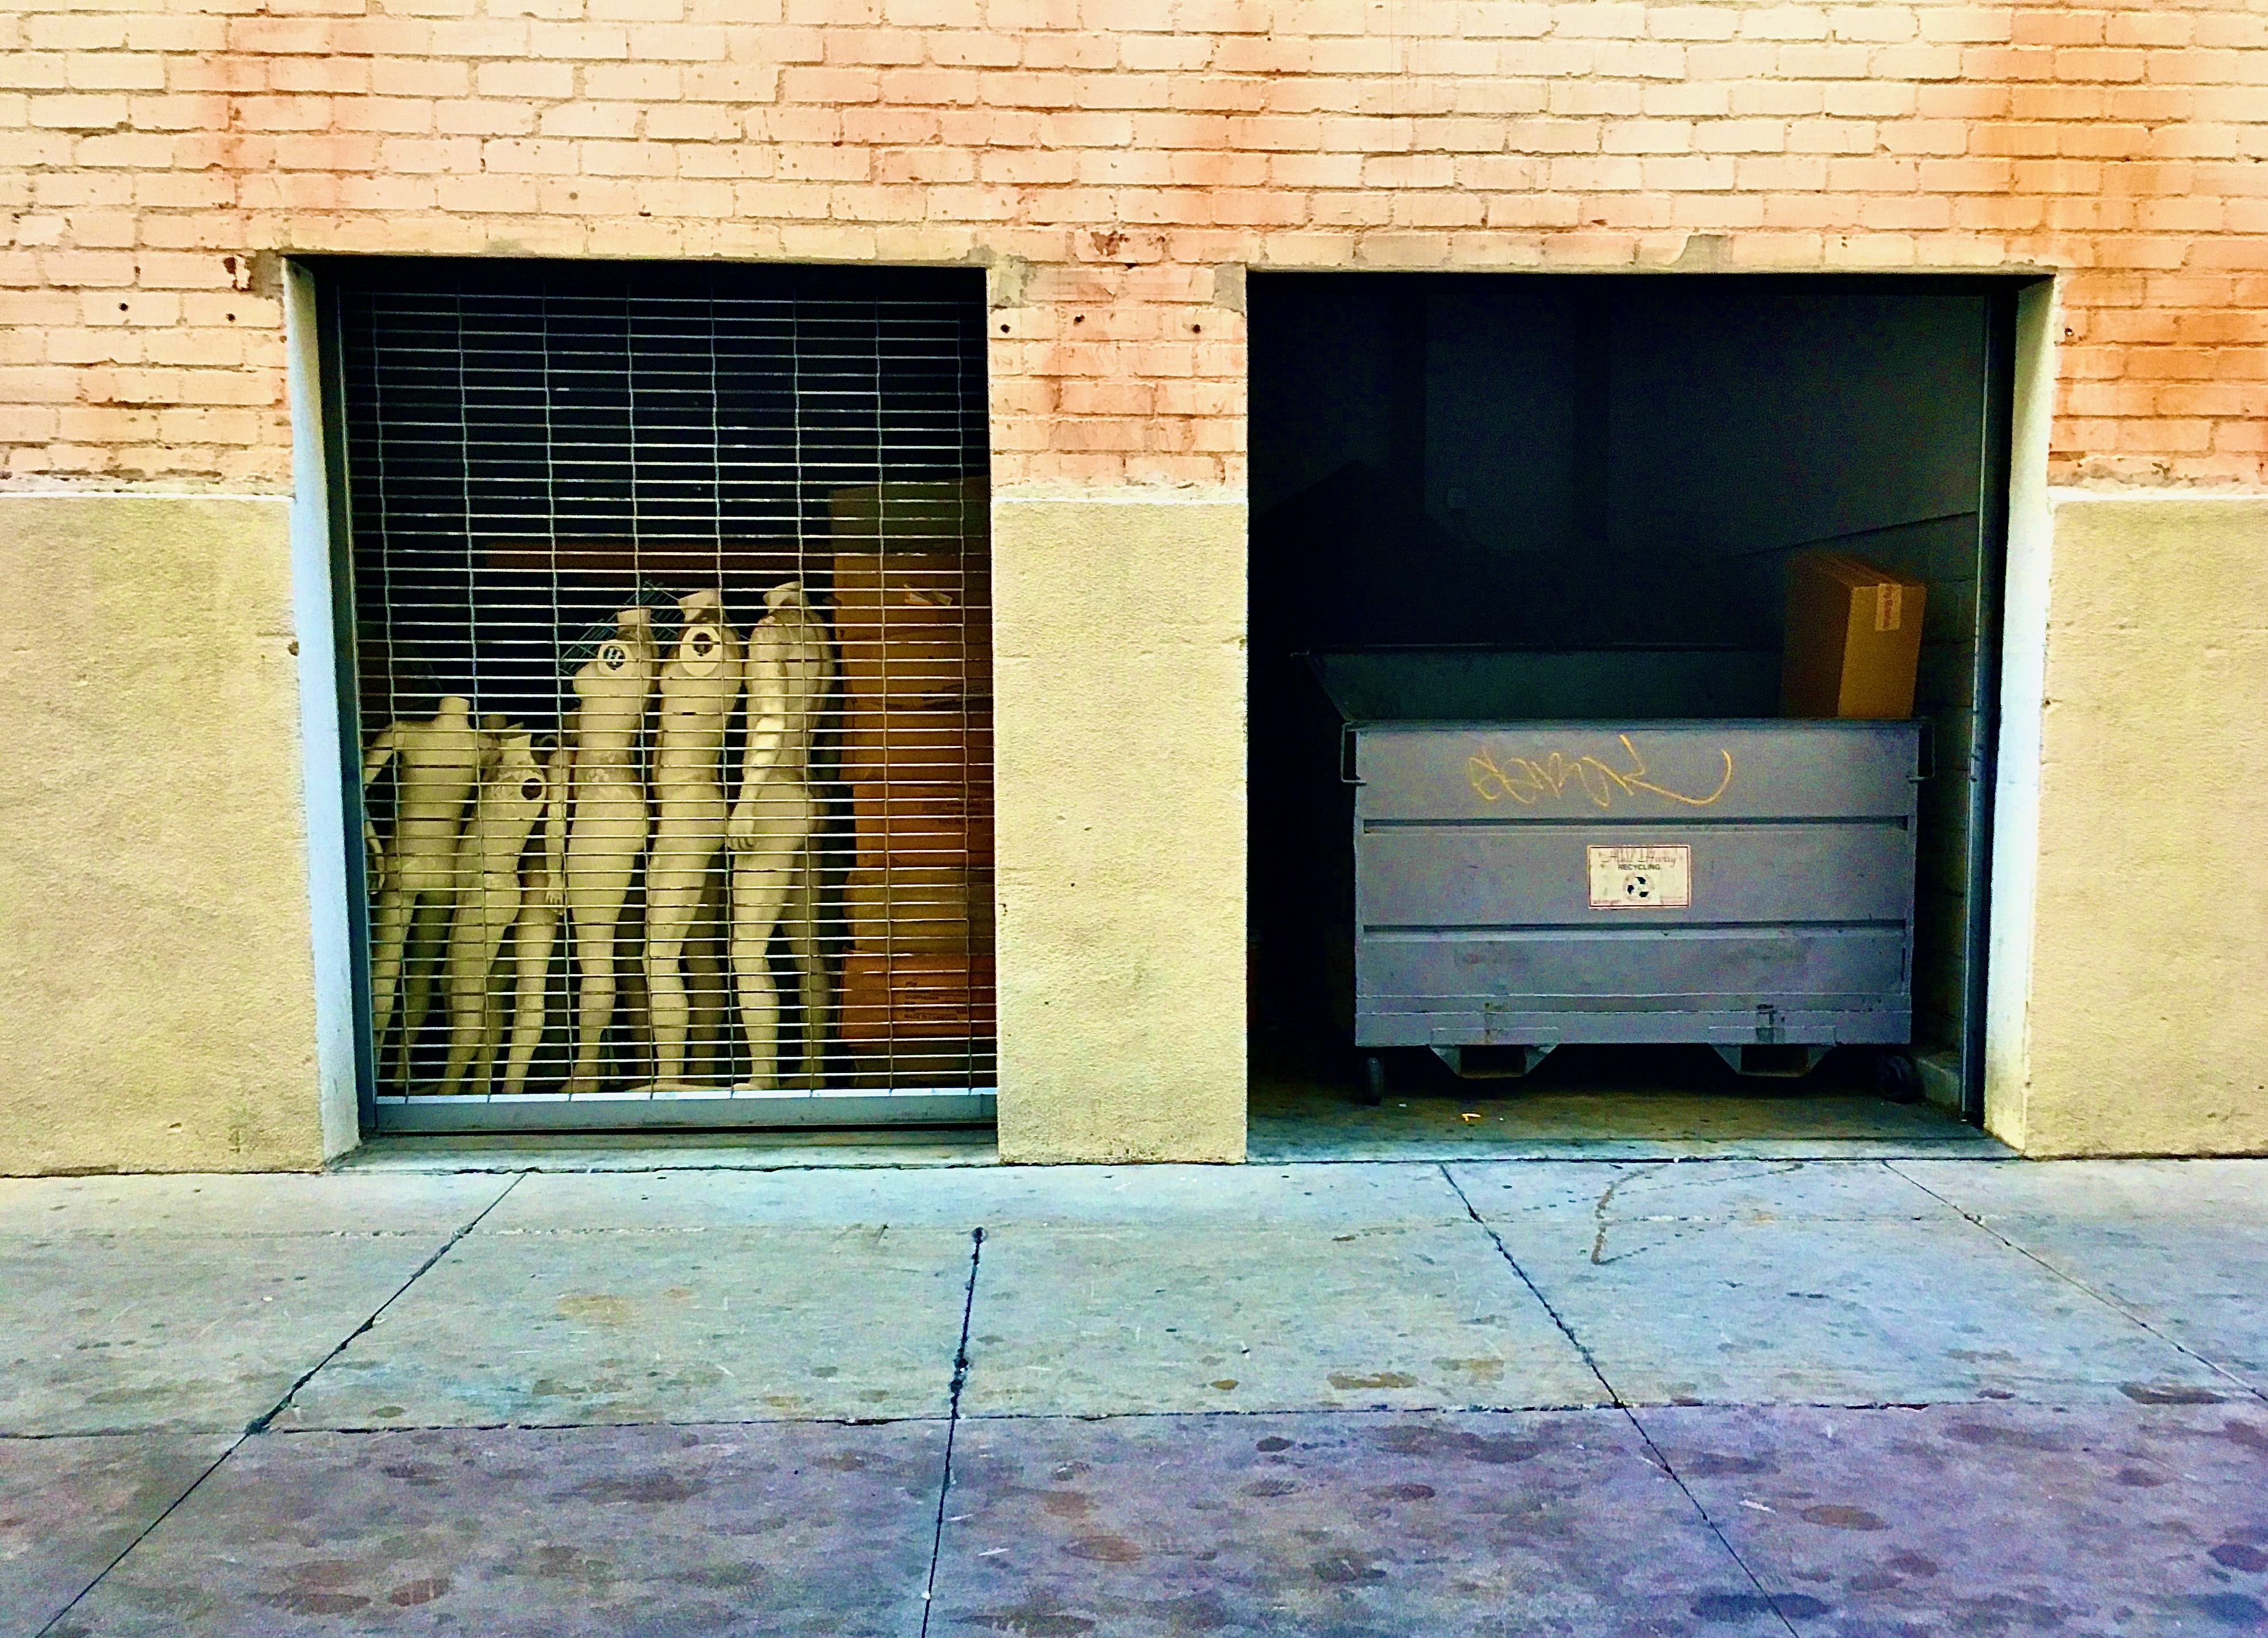 dumpster and mannequins in alley